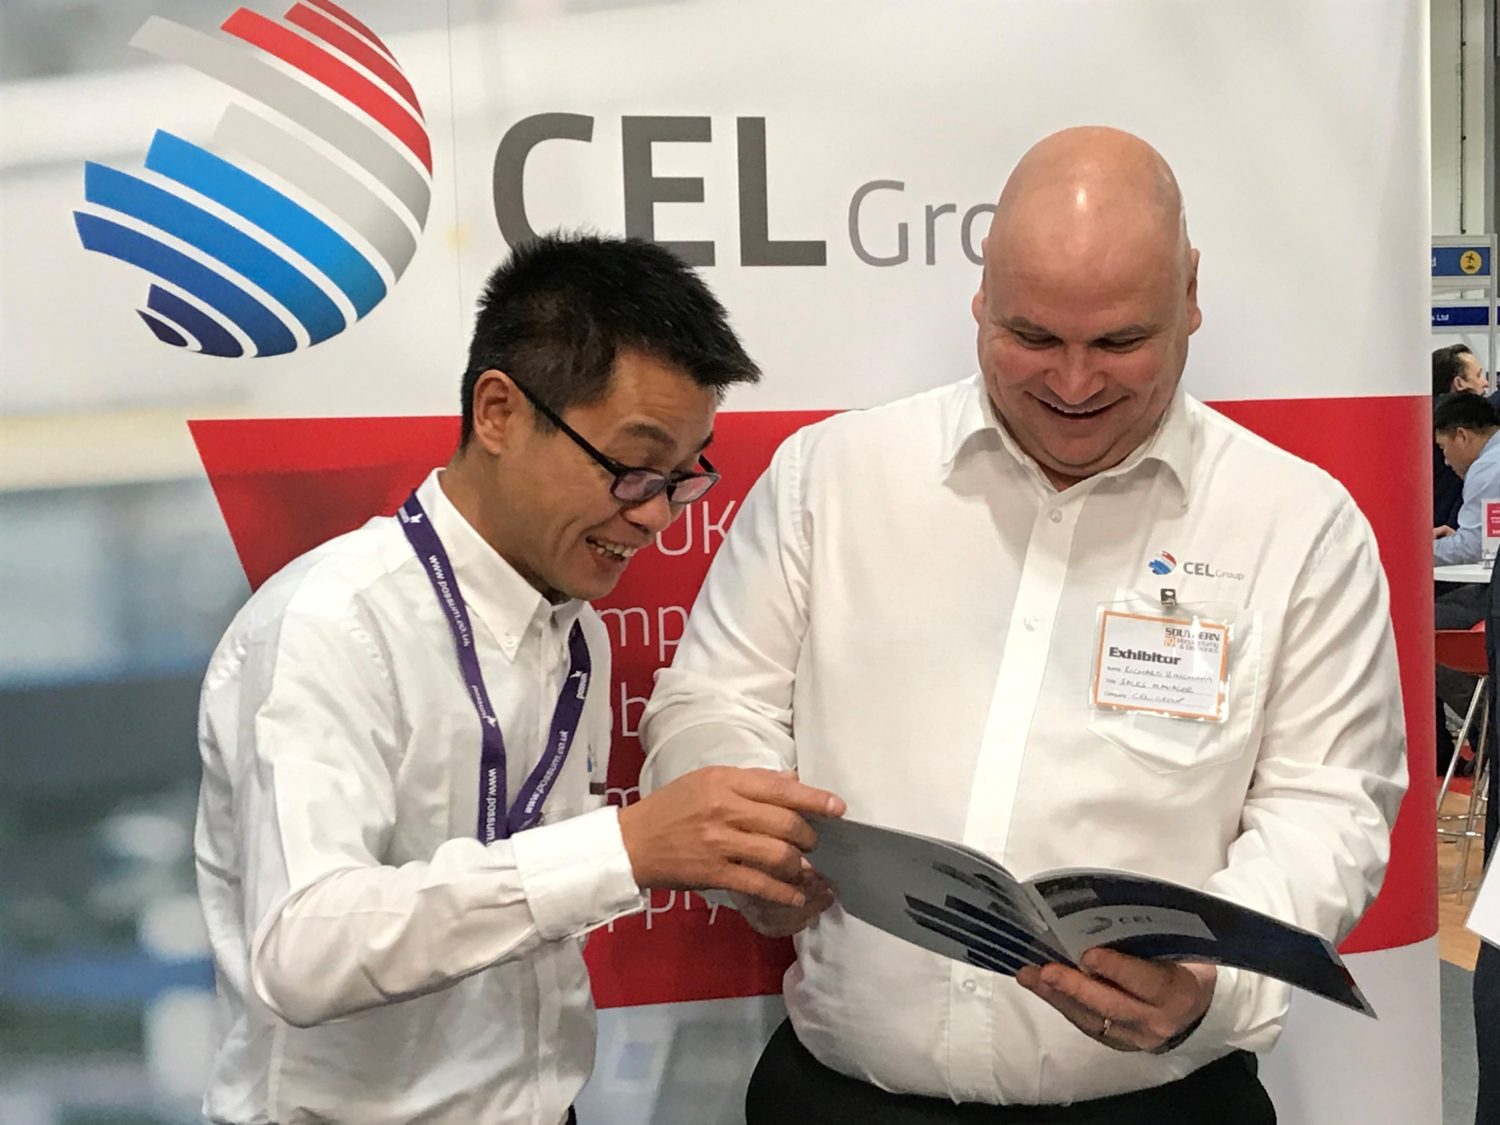 CEL Group's engineers discuss quality managed sub-contract manufacturing in China at Southern Manufacturing